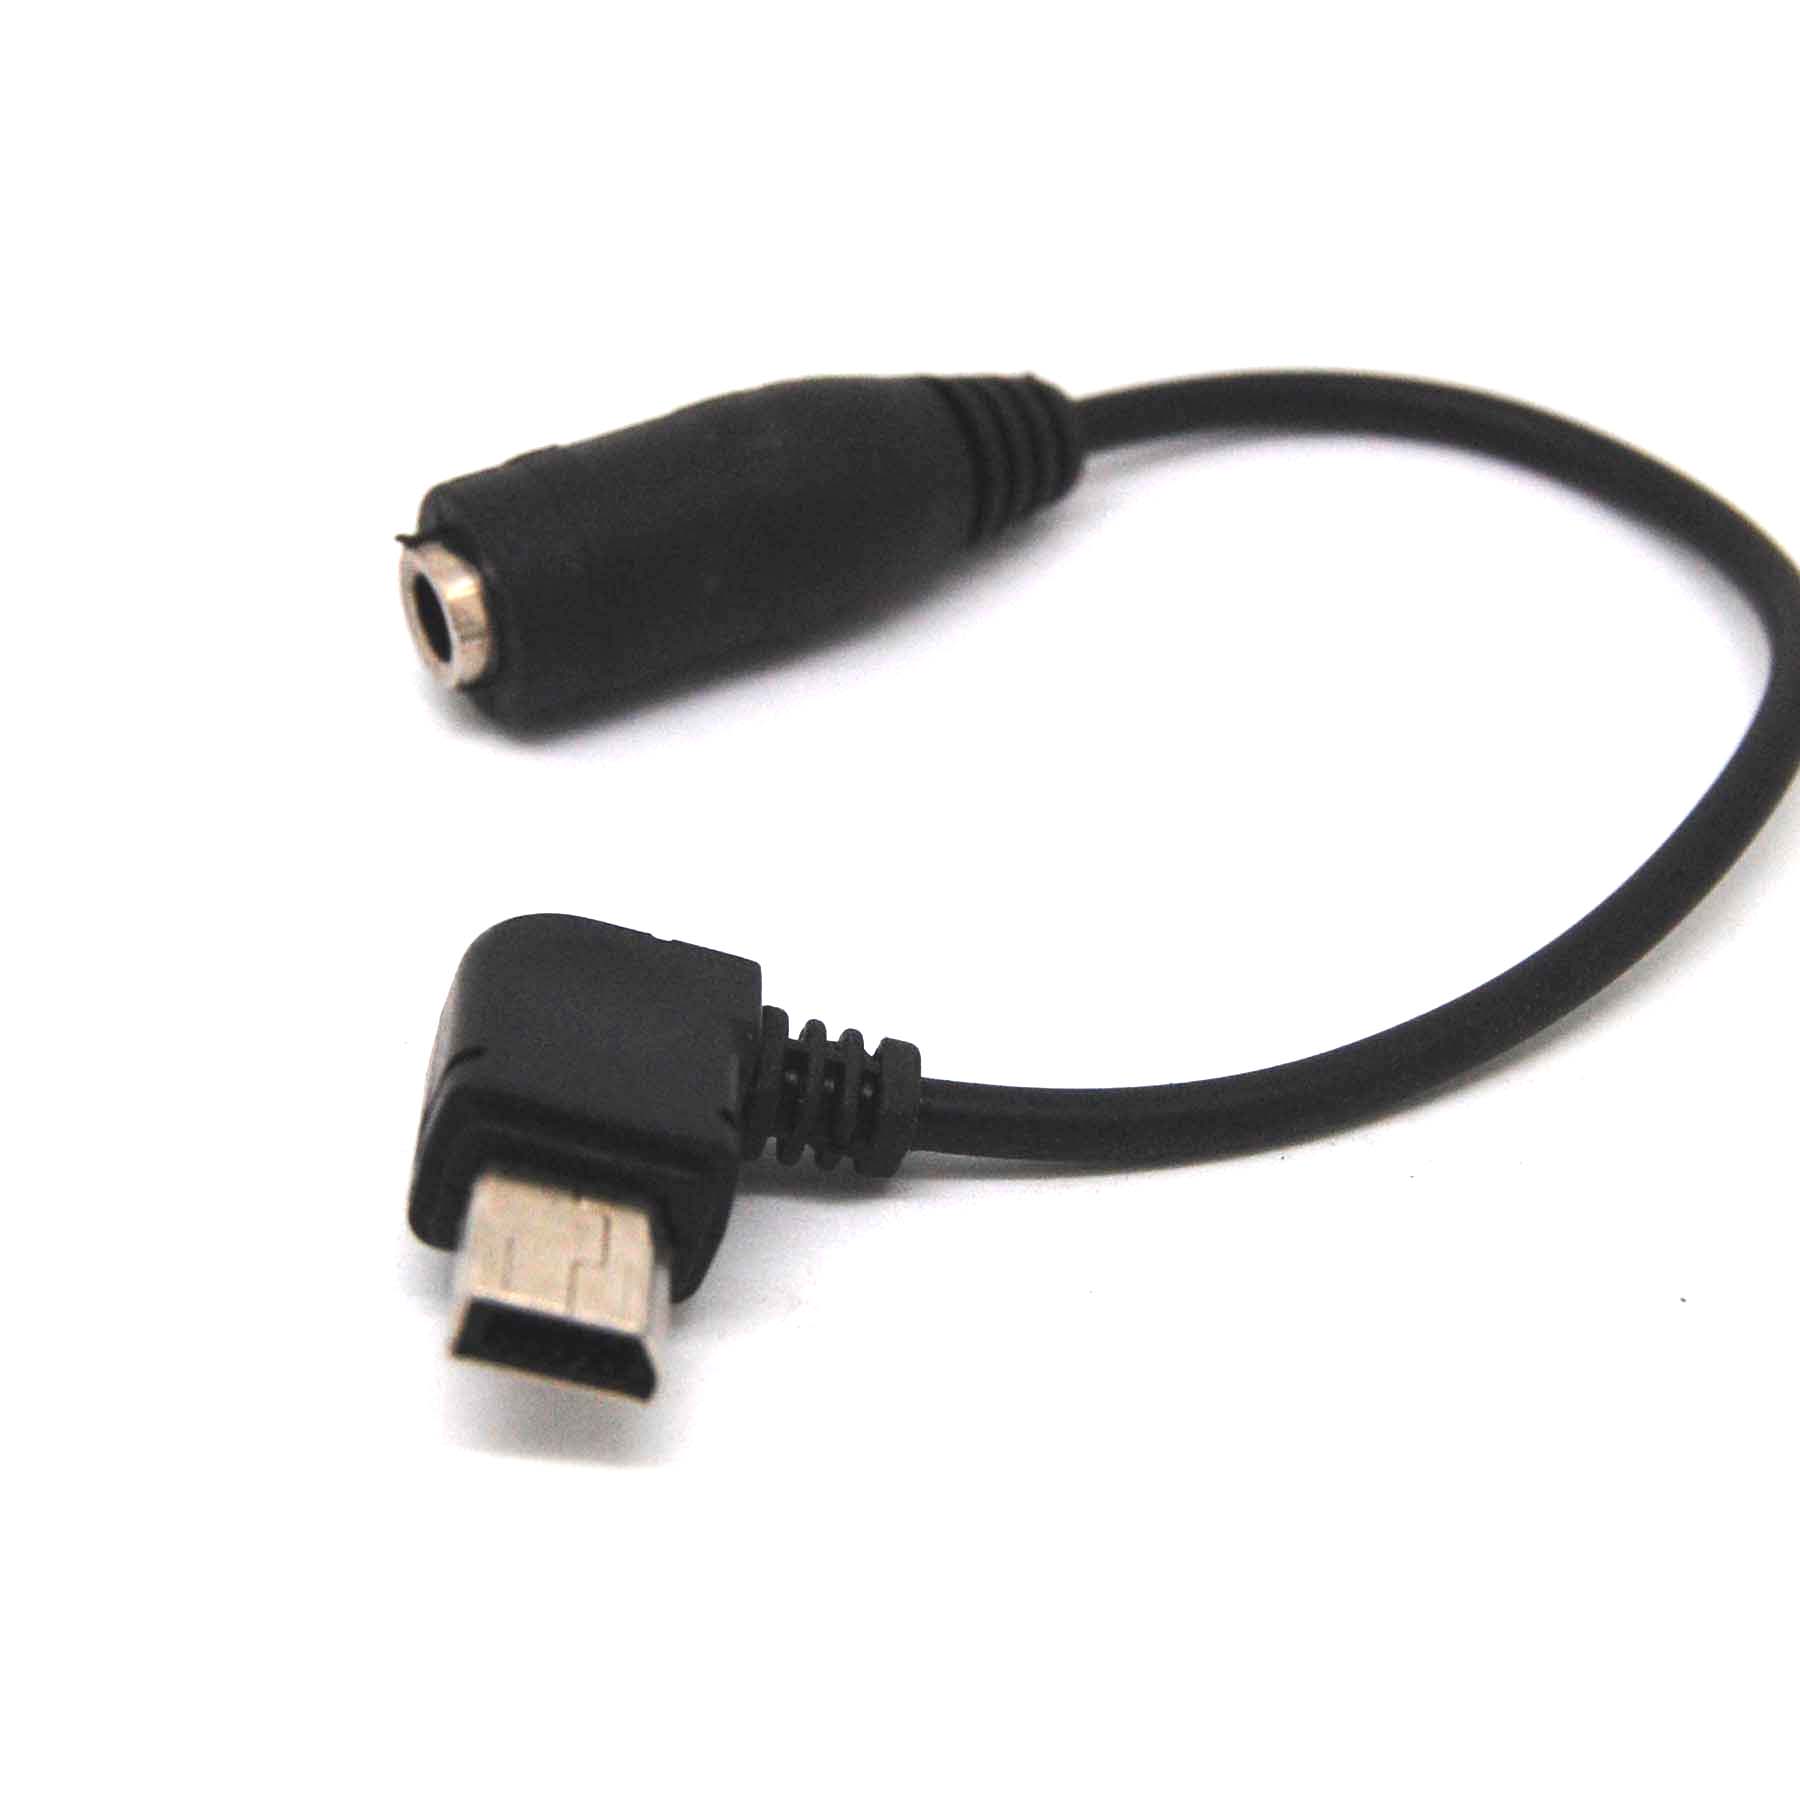 11Pin Mini-USB to 3.5/3.5mm Adapter for HTC G1 Android HTC Titan Love Touch Diamond HTC Phoebus PPC6800 S620 Panda S720